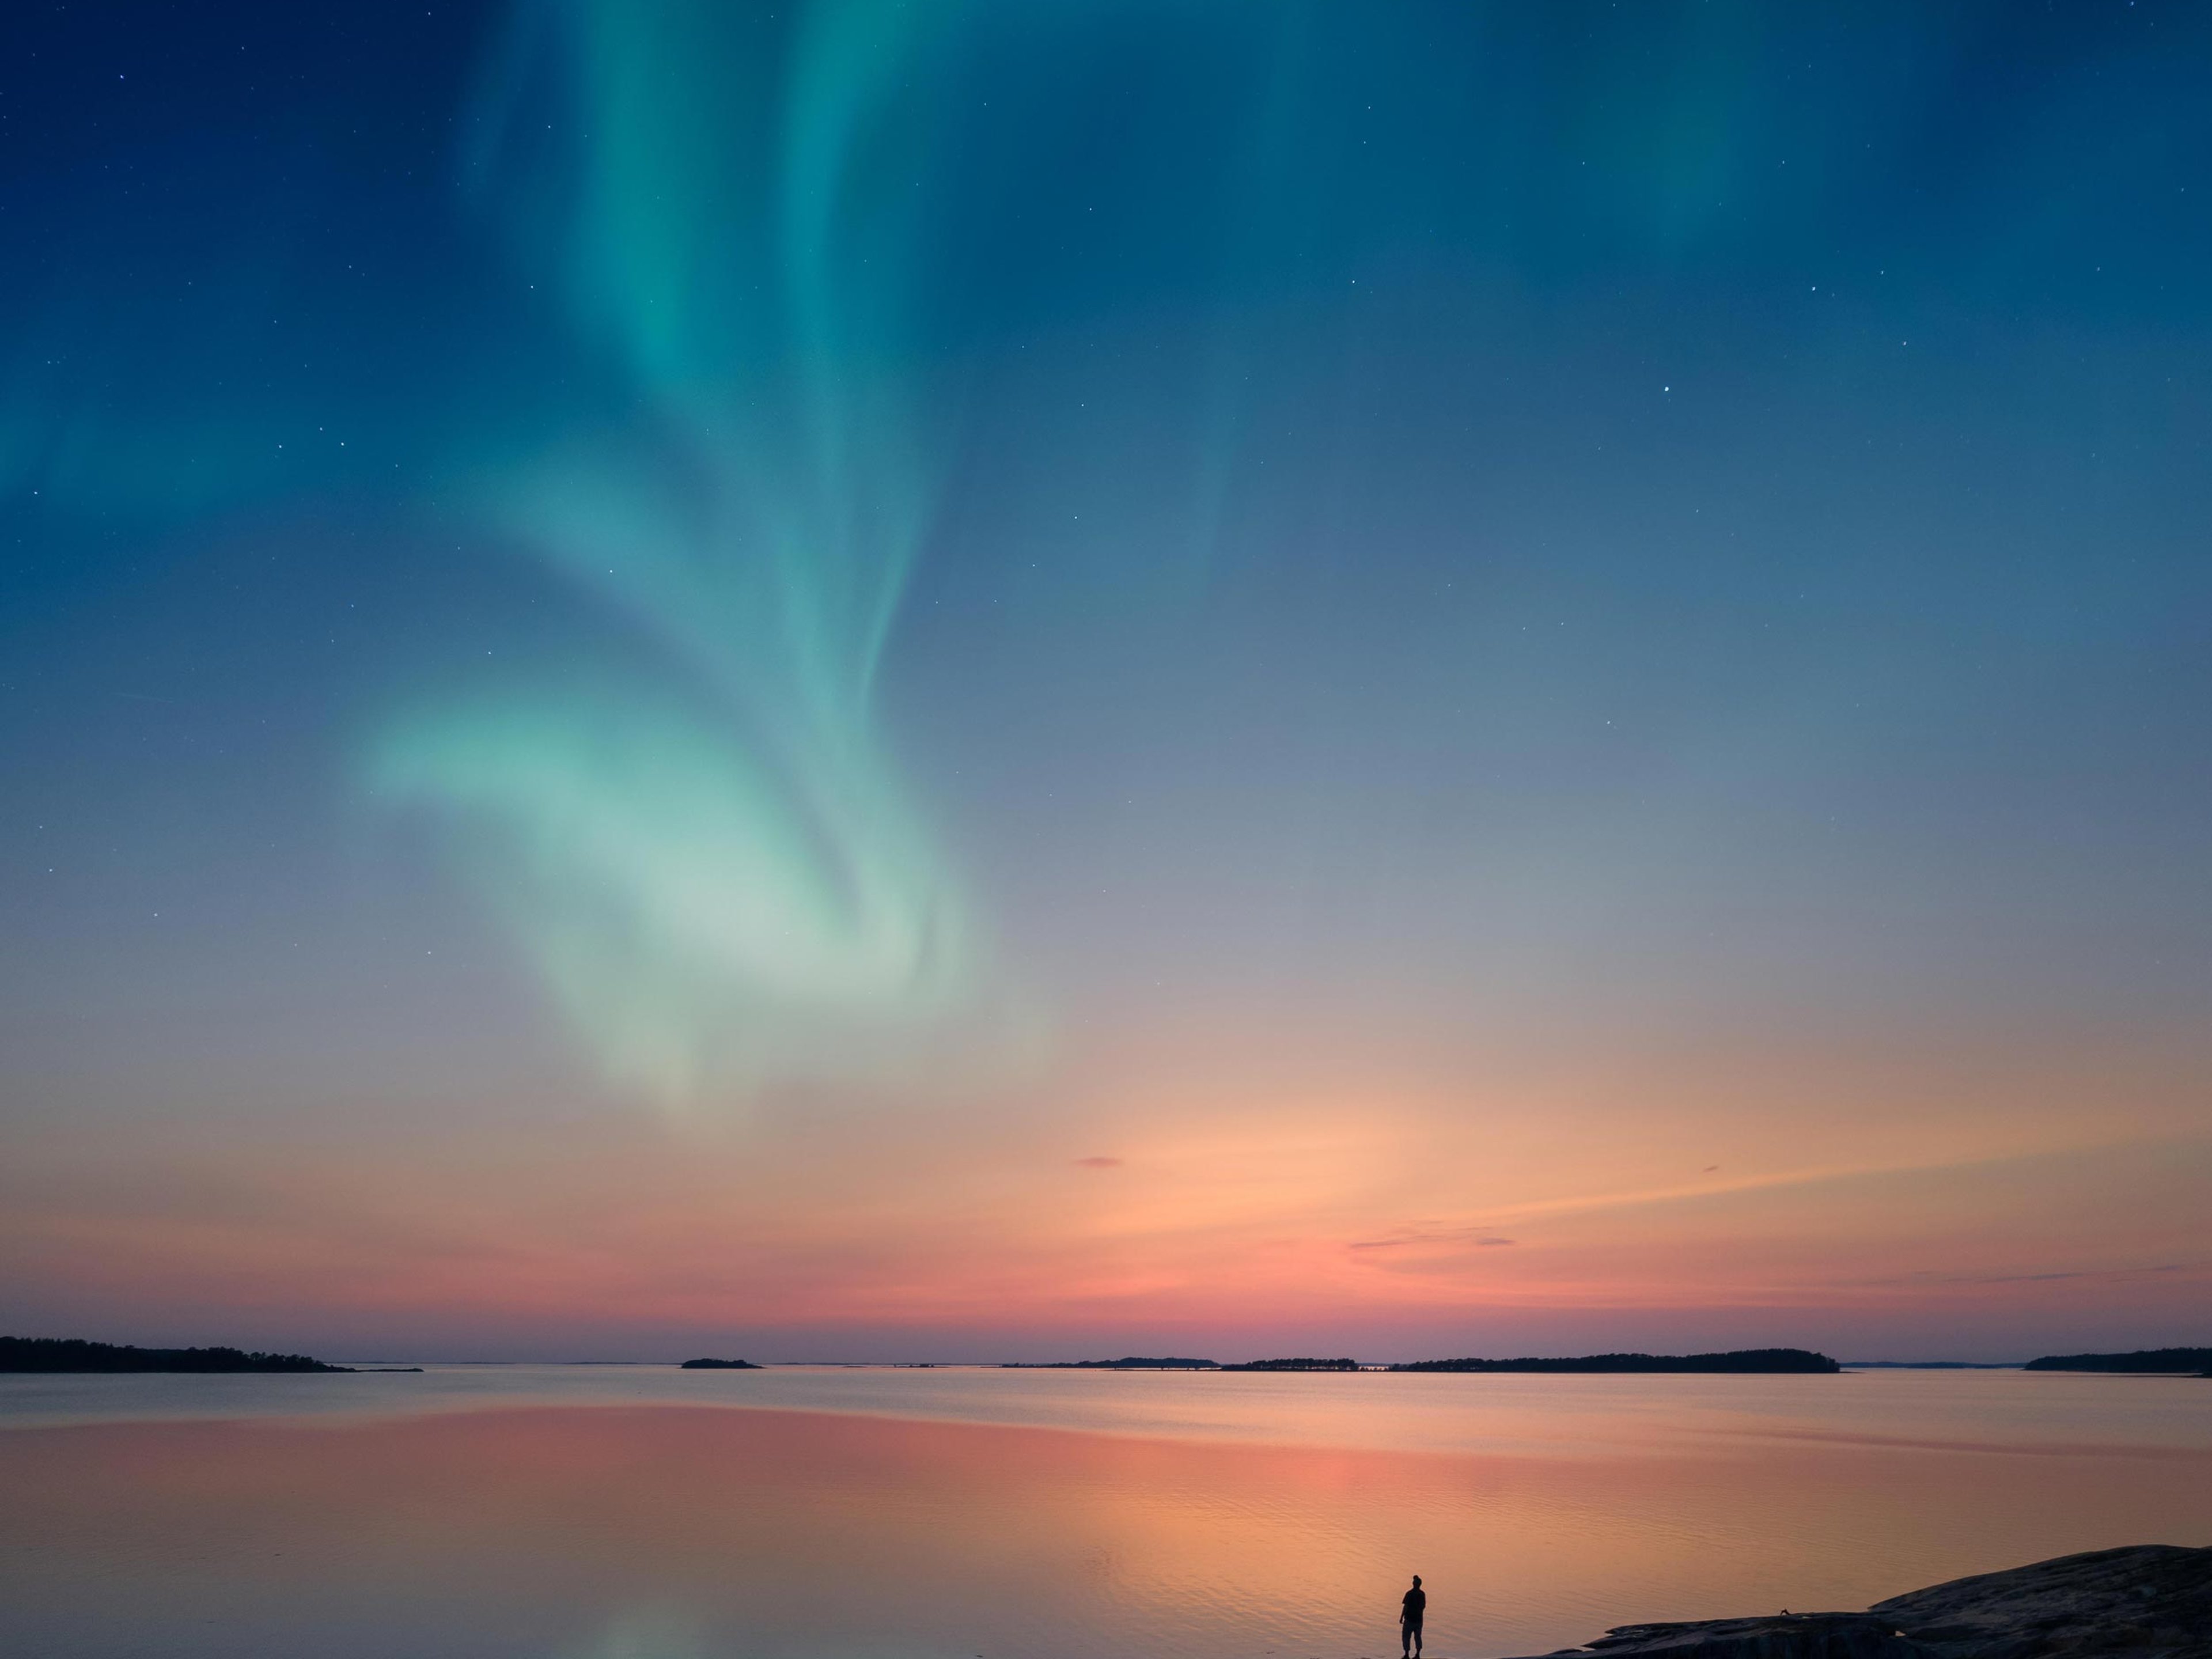 Silhouette of a man standing by a lake shore and looking at a beautiful aurora borealis on the sky with reflections on the calm lake.